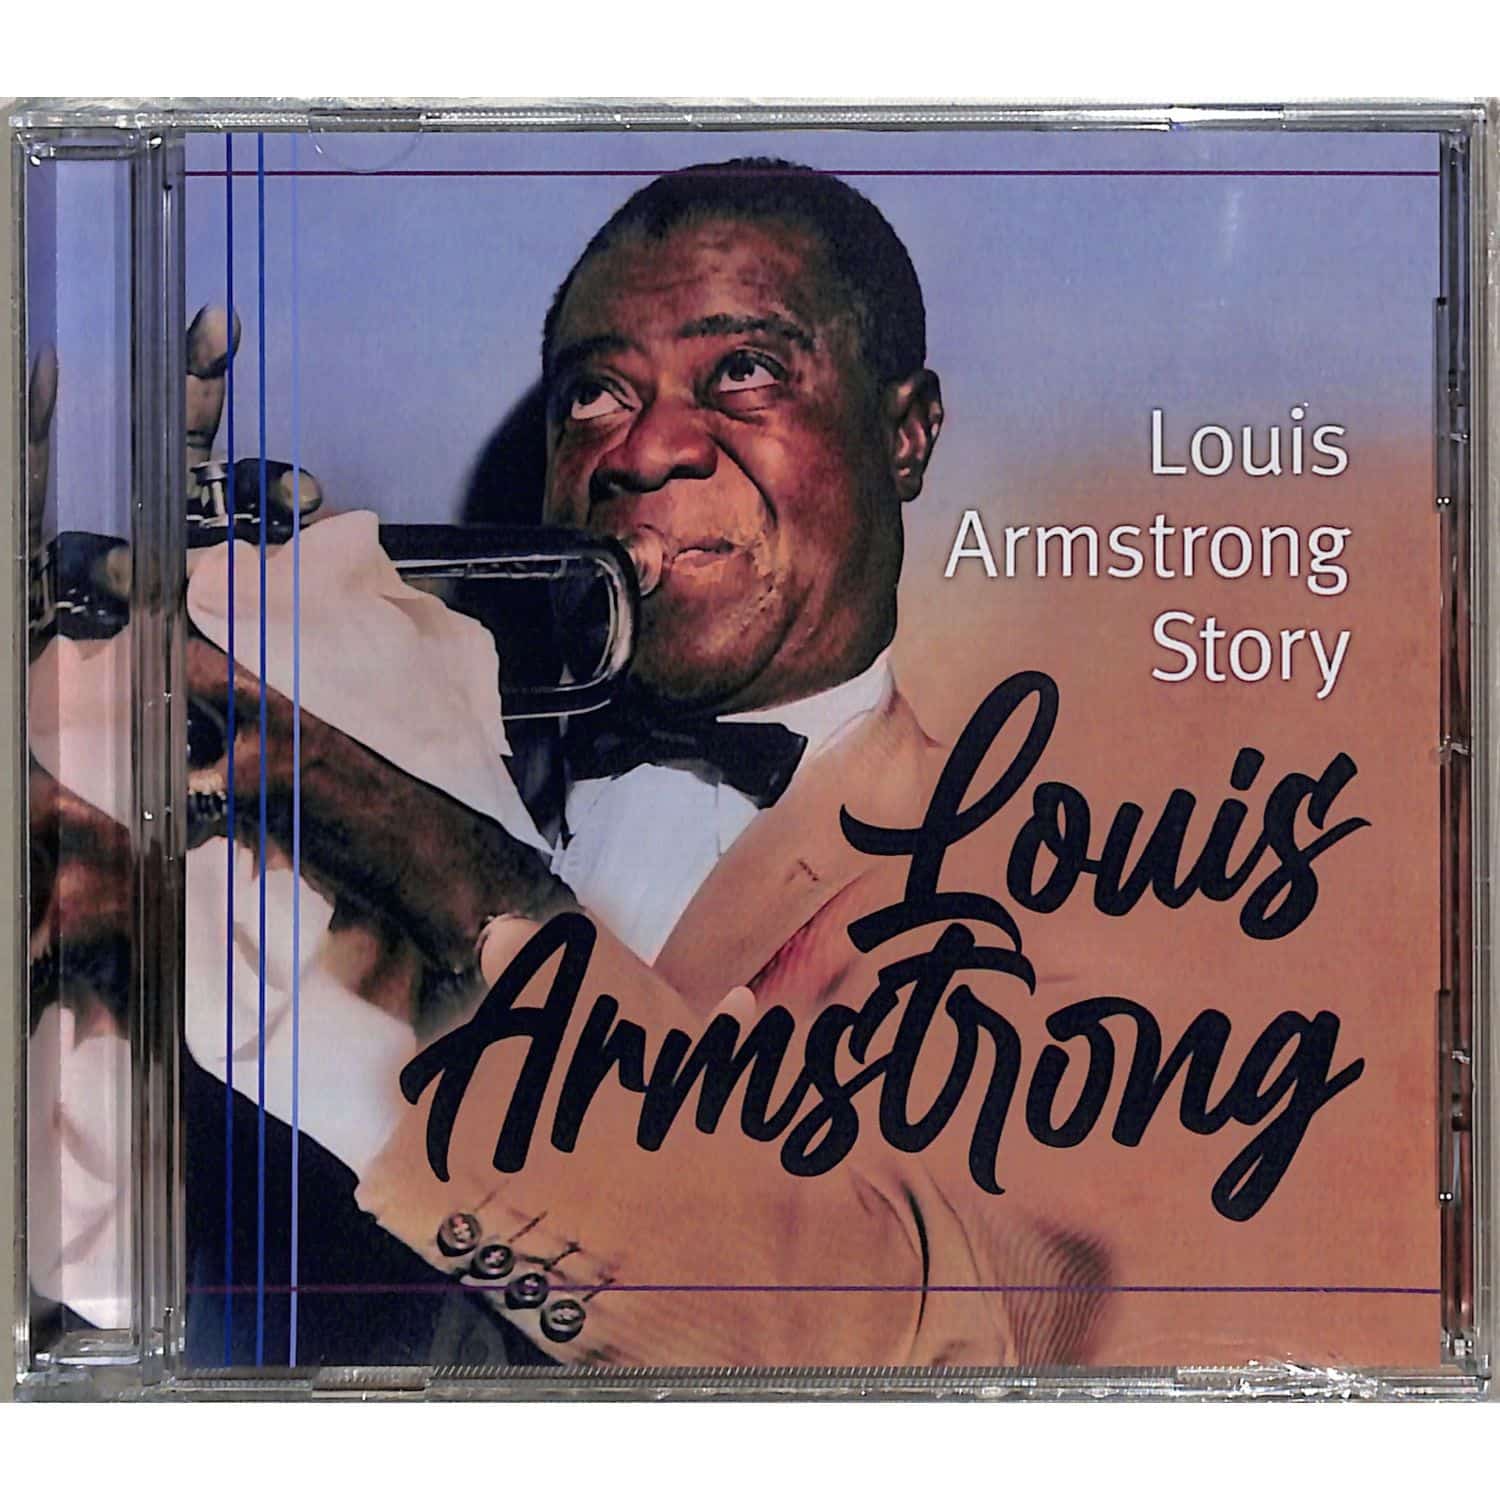 L.-Omid P.Eftekhari-T.Tippner Armstrong - LOUIS ARMSTRONG STORY 